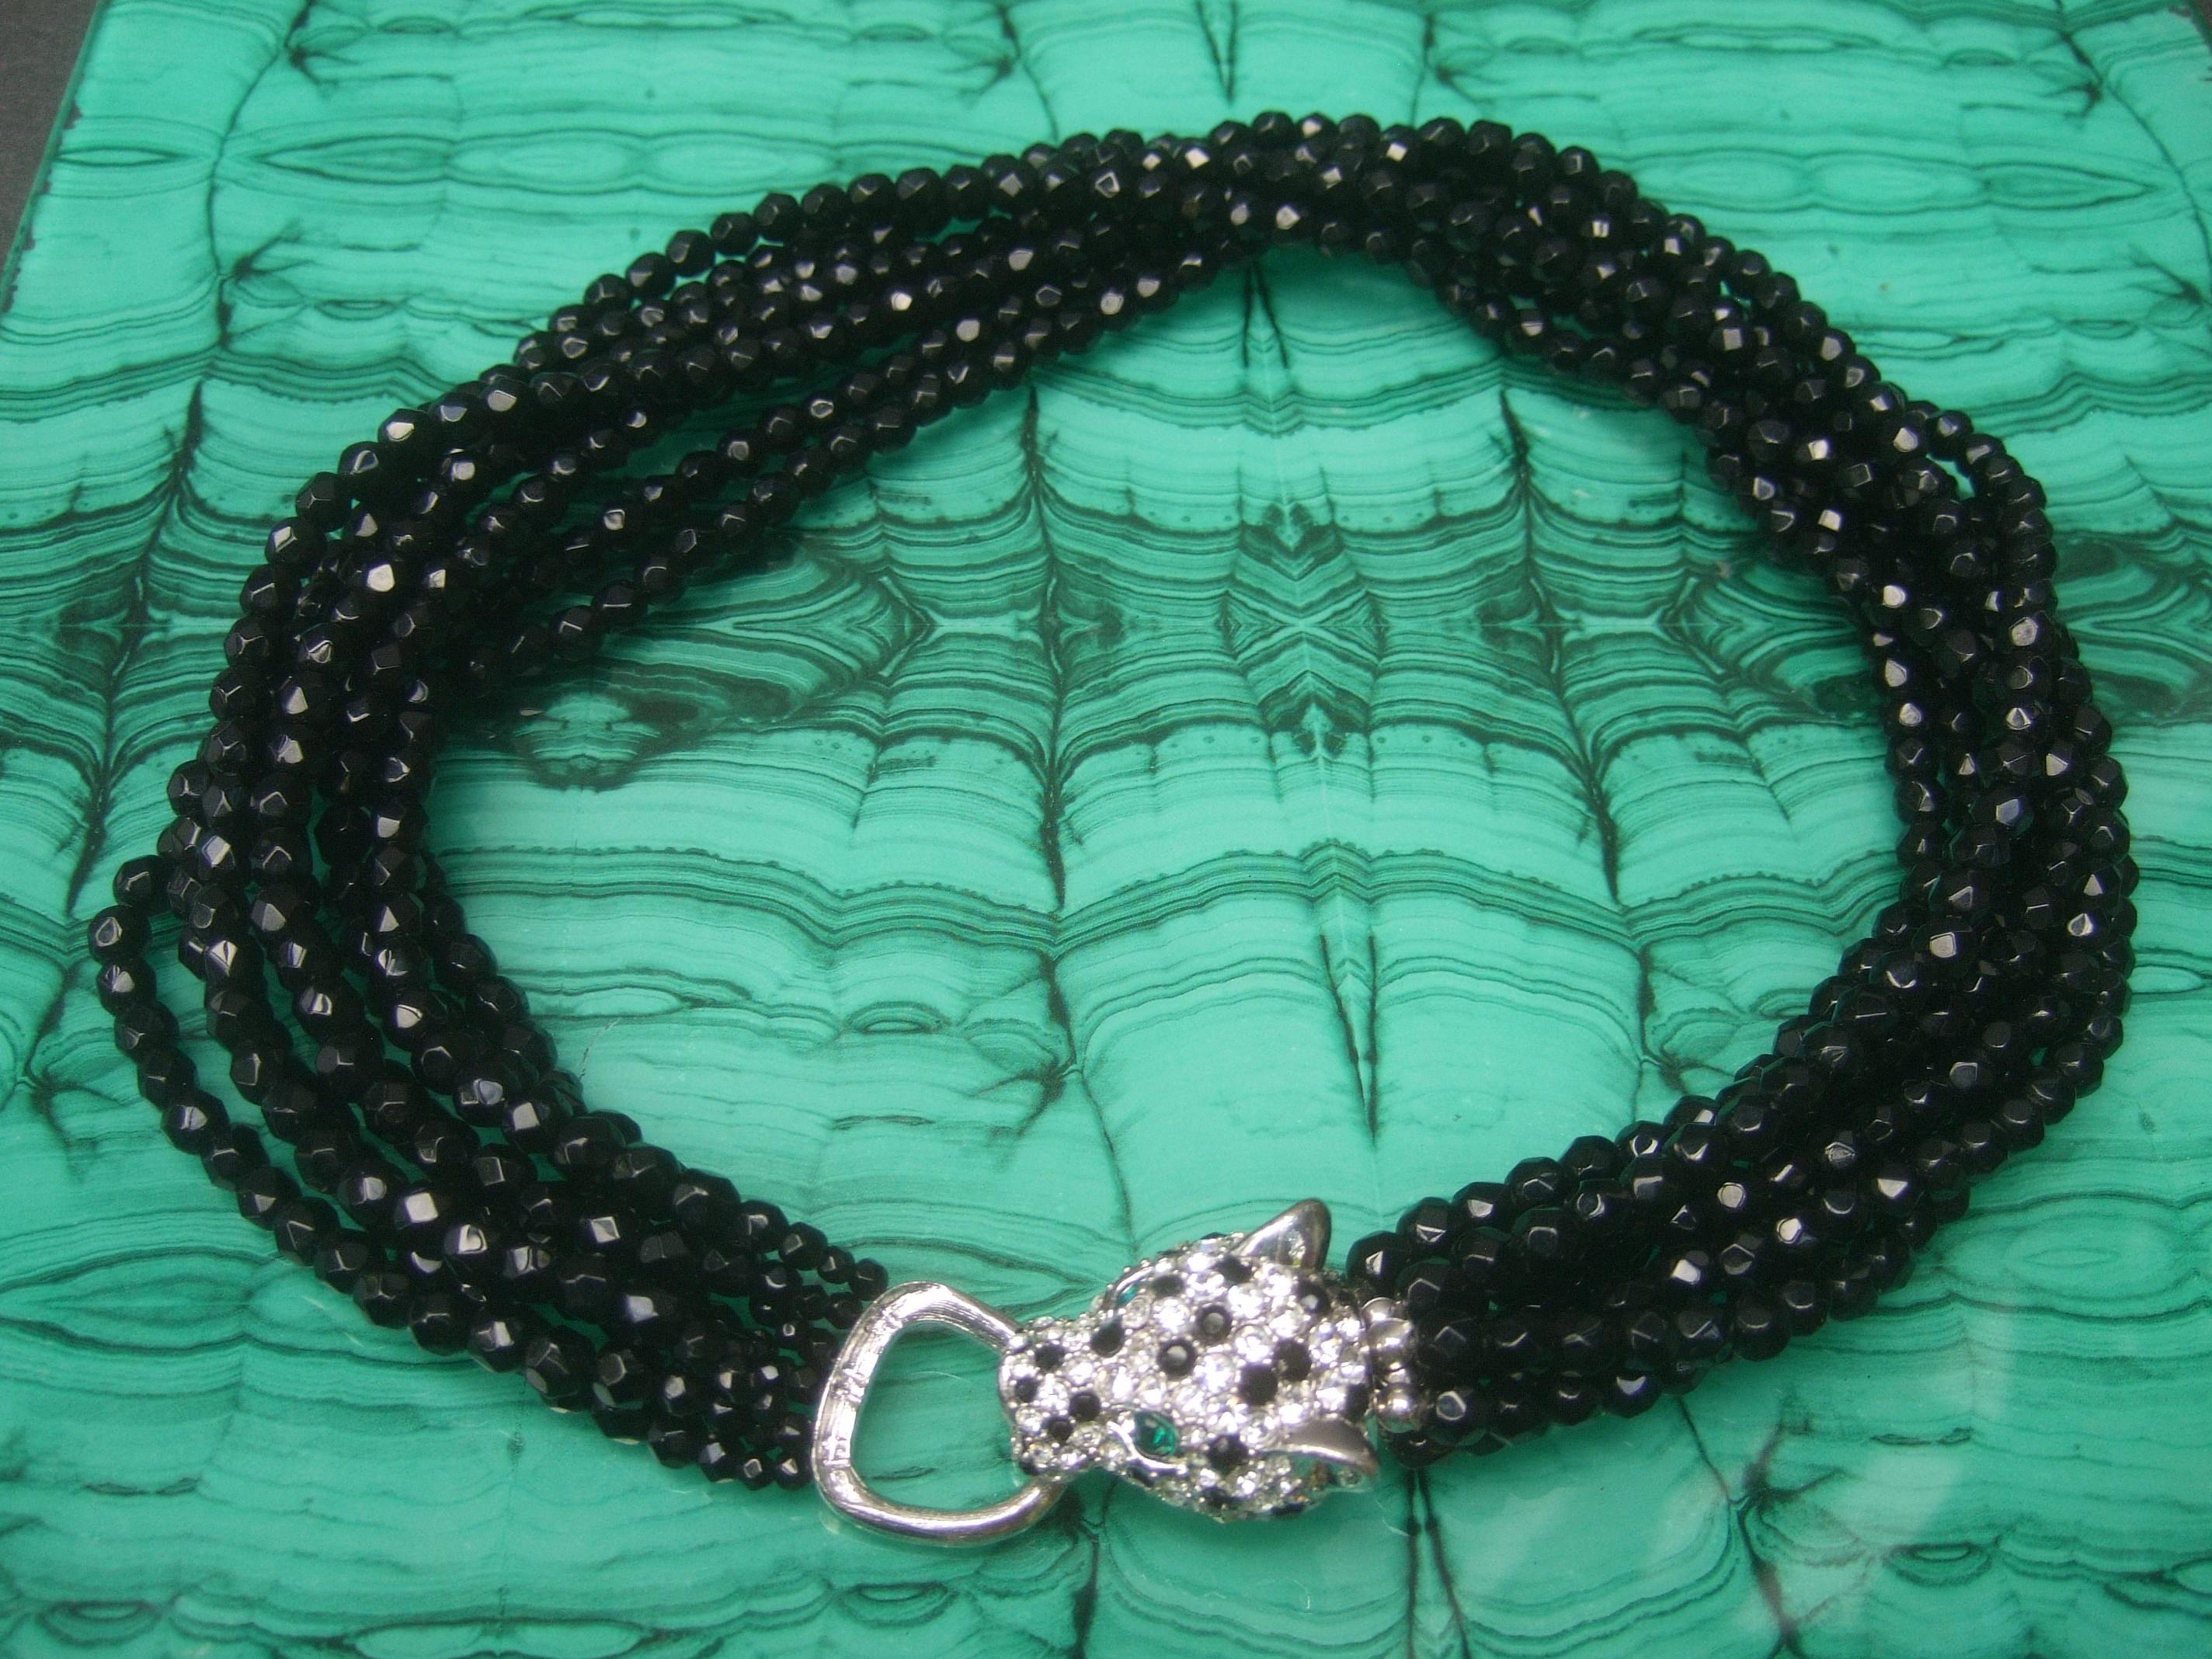 Ken Lane Exquisite jet glass beaded jeweled panther clasp choker style necklace c 1980
The elegant glass beaded necklace is designed with eight strands of black faceted glass beads
The clasp is adorned with an exquisite crystal encrusted panther's